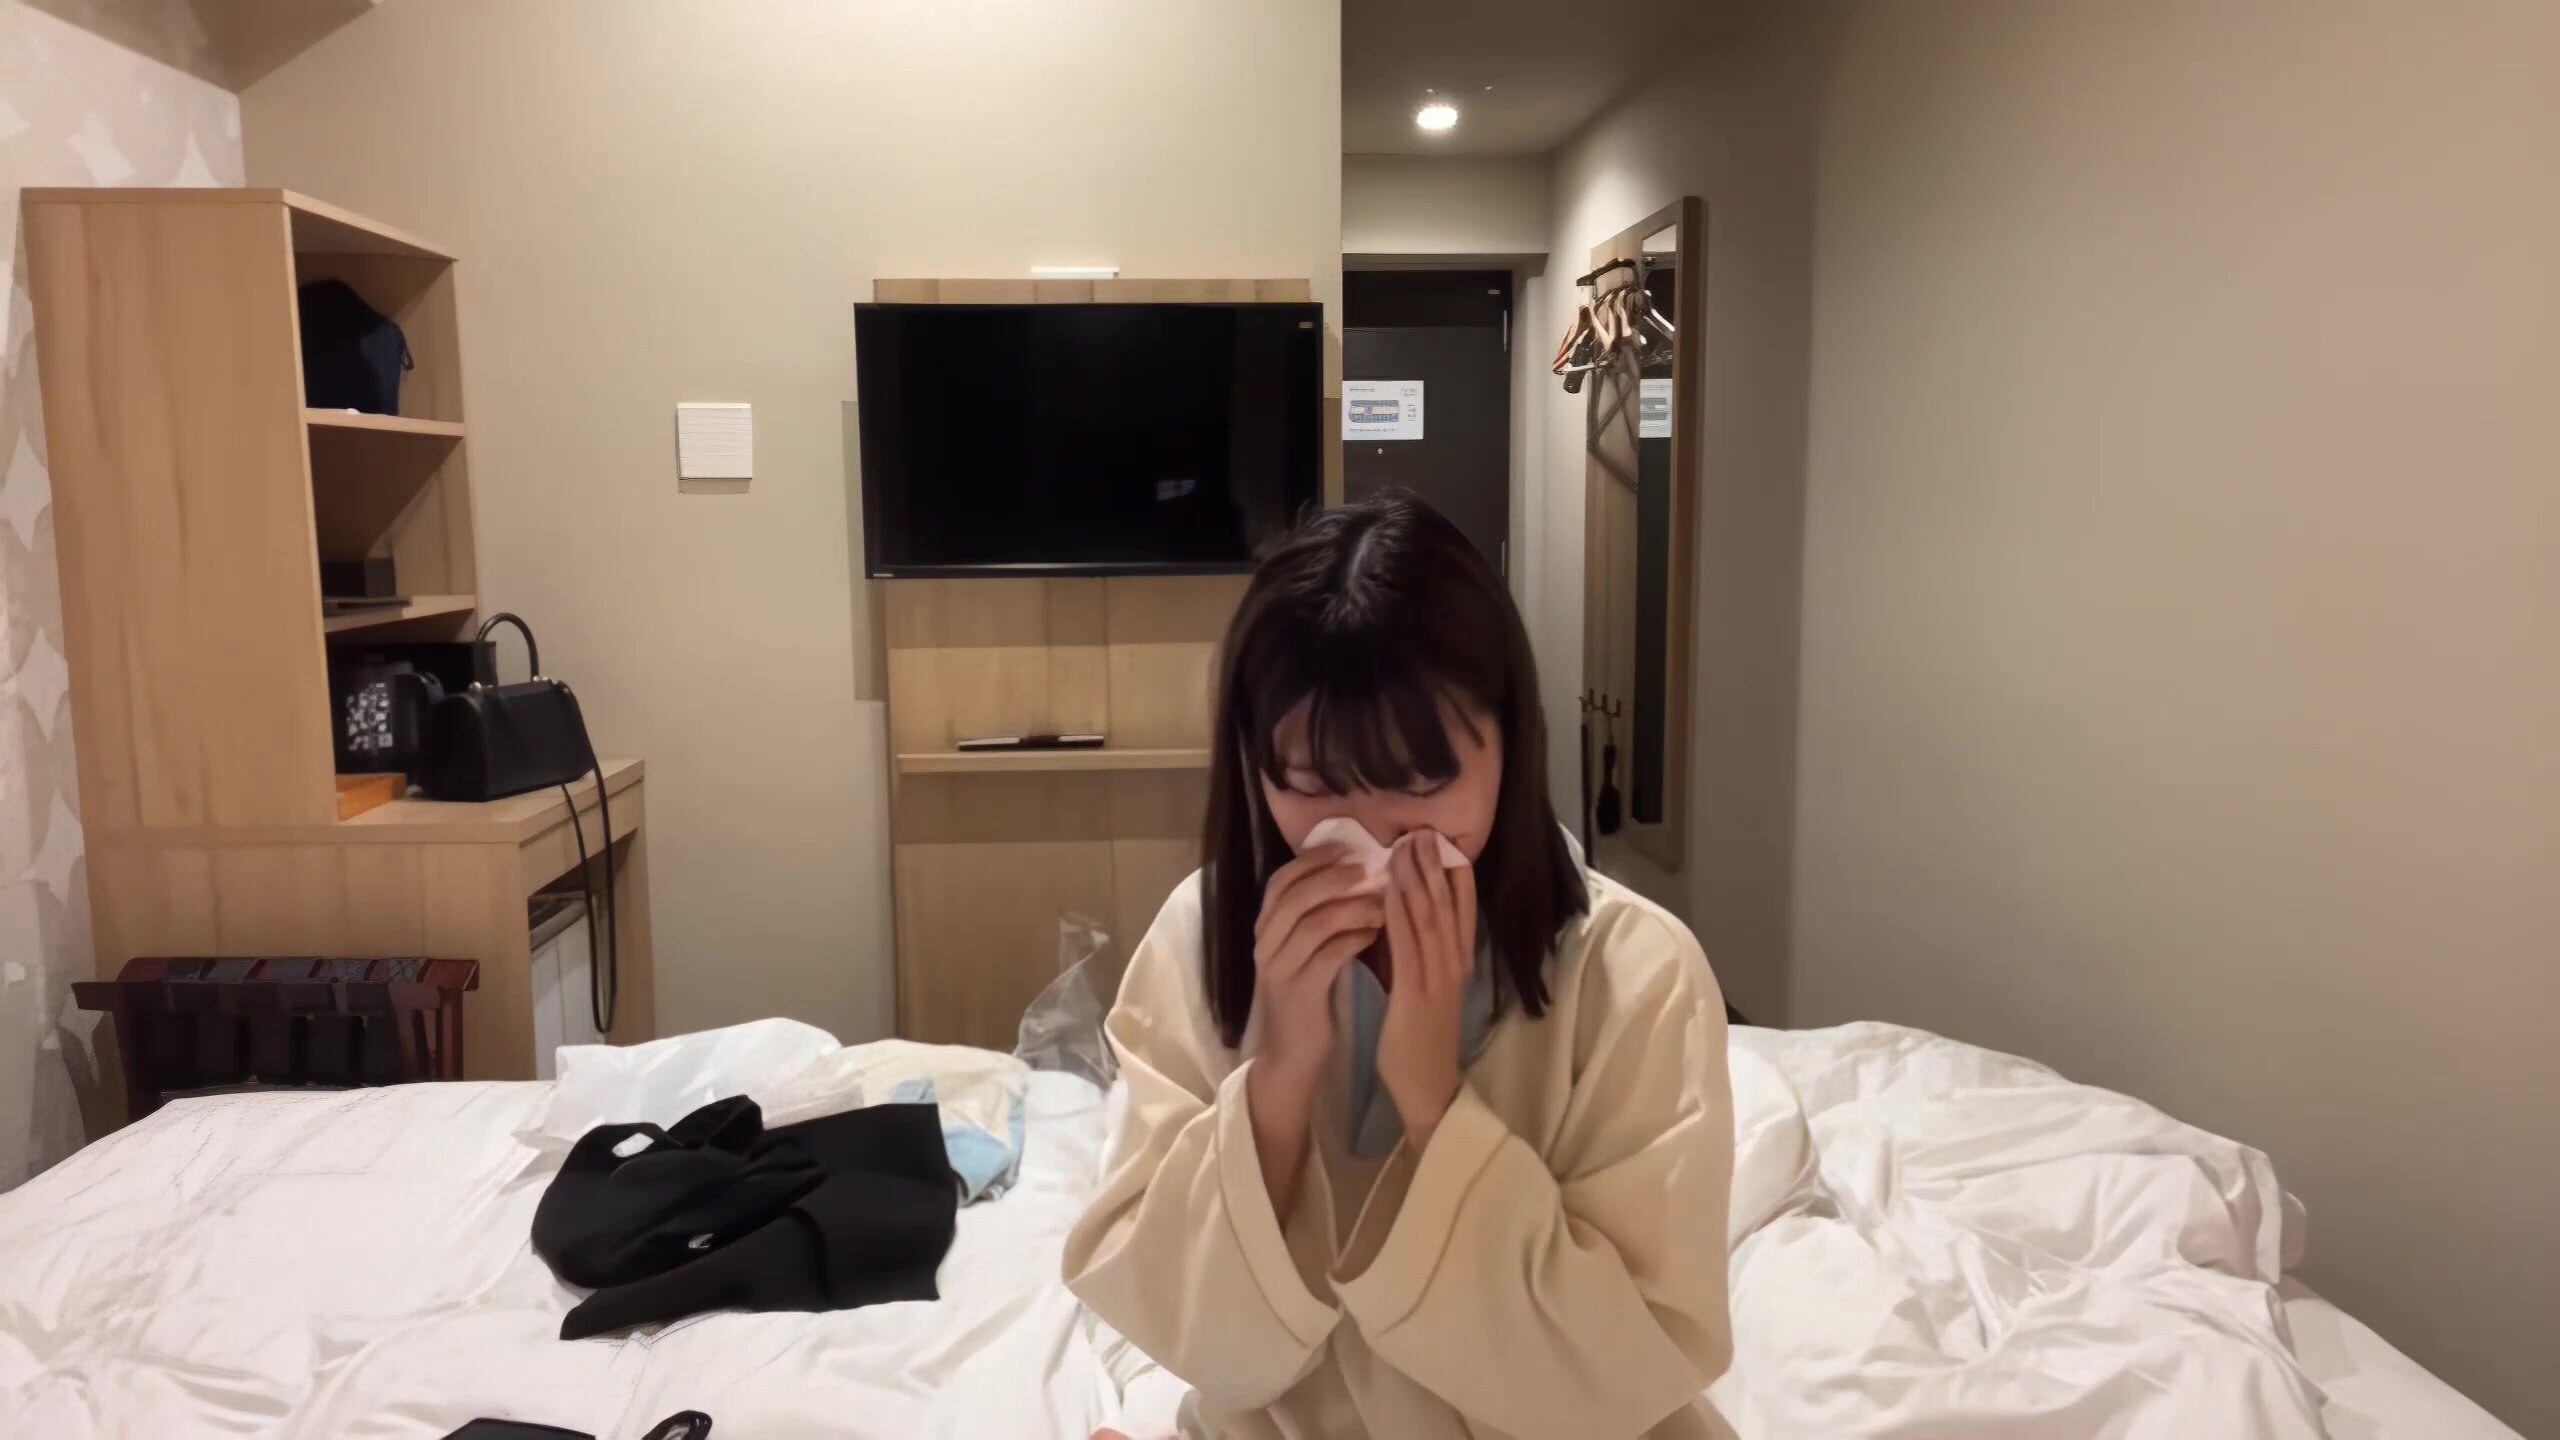 More nose blows and a sneeze from cute Asian girl